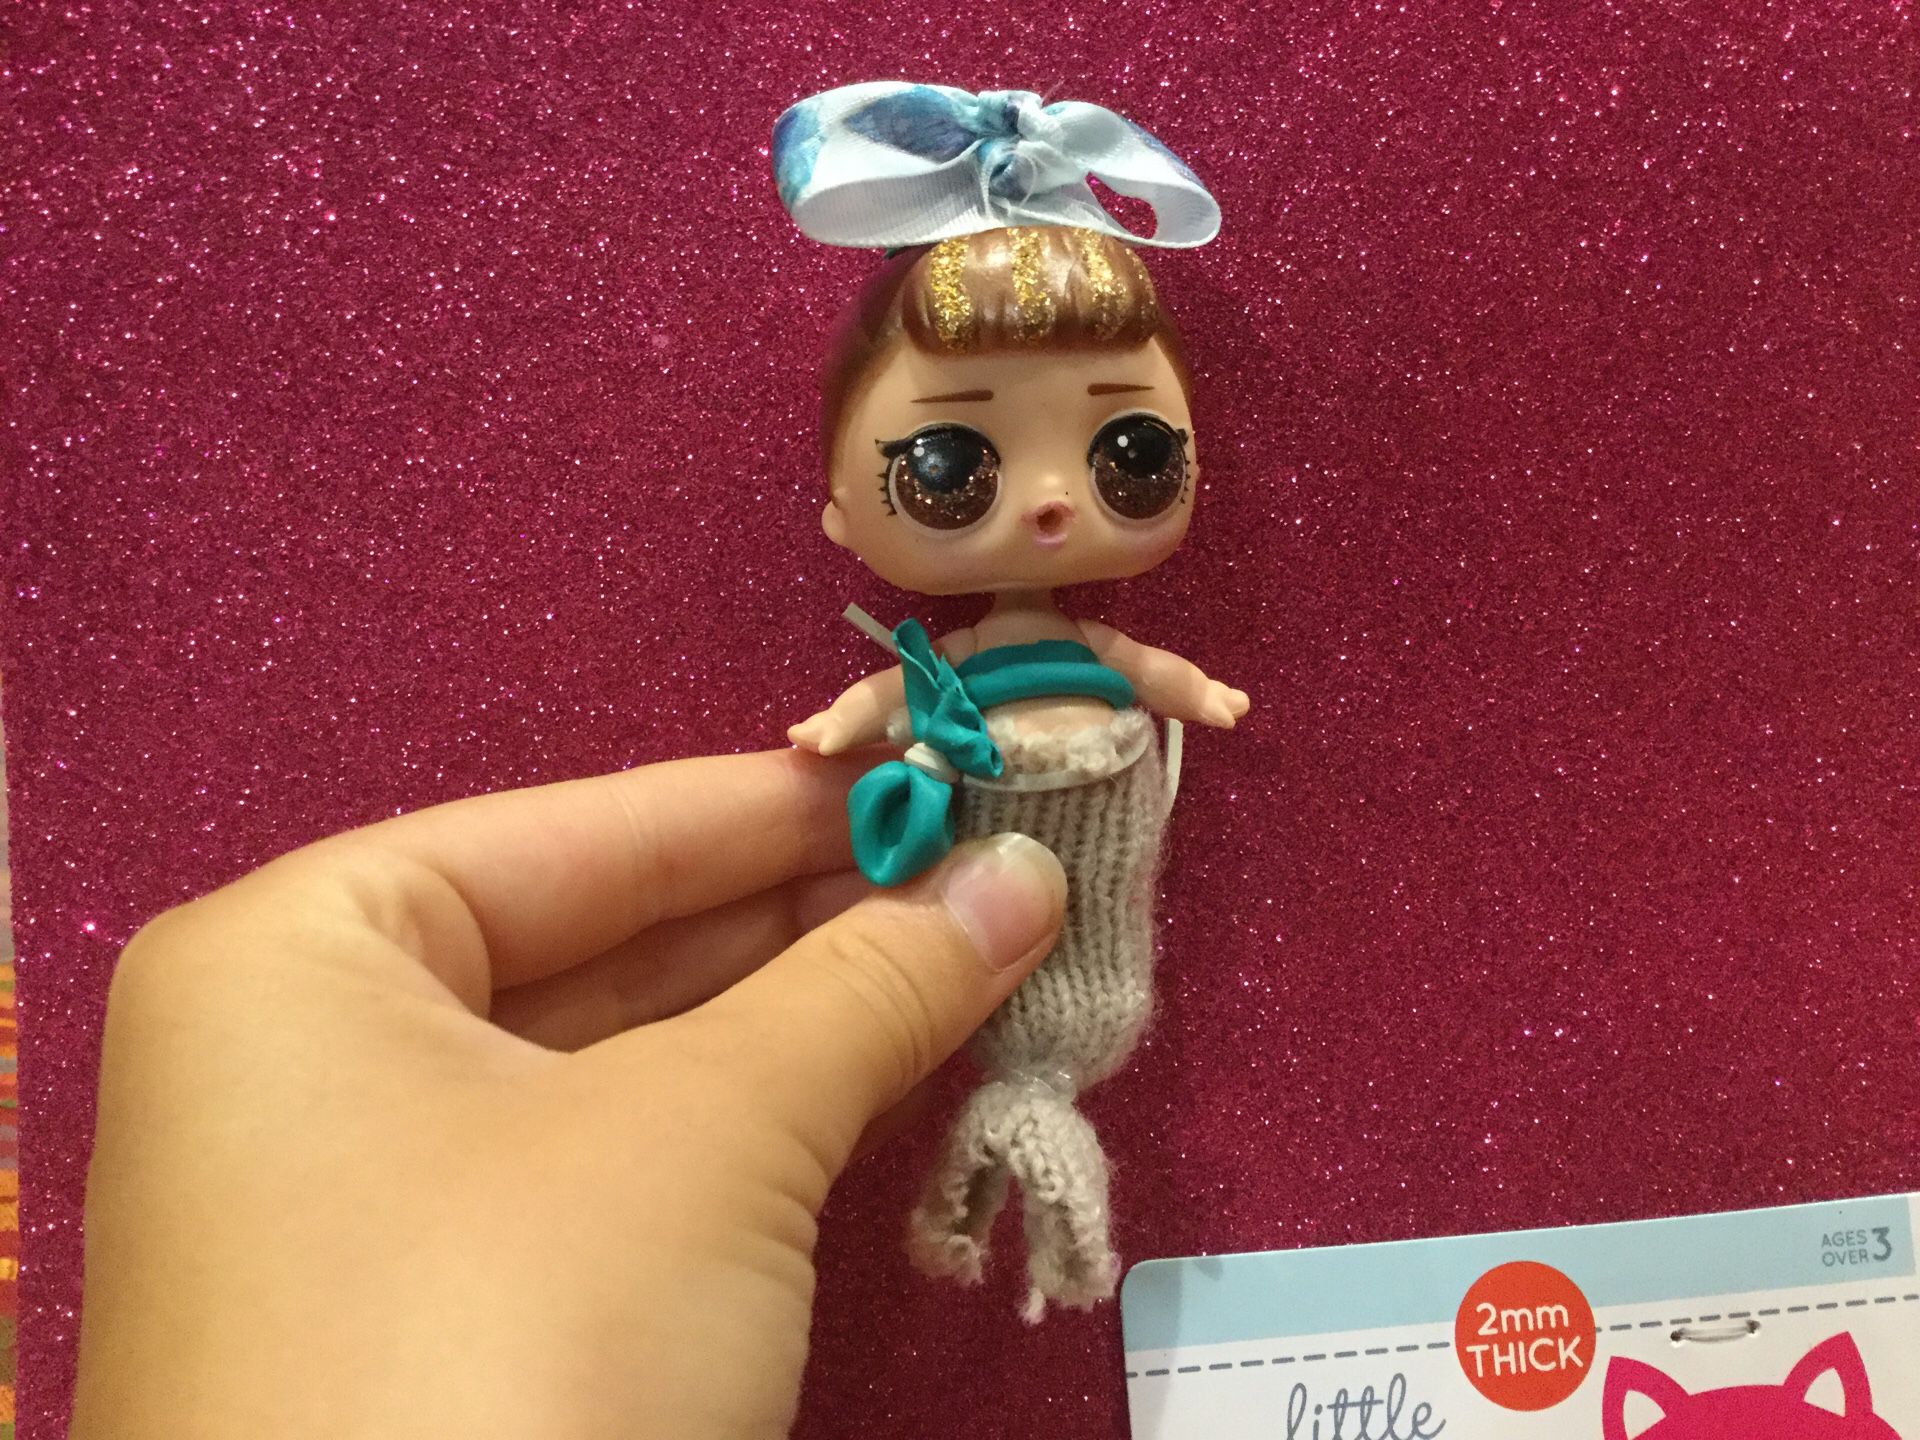 Lol custom made mermaid outfit doll included